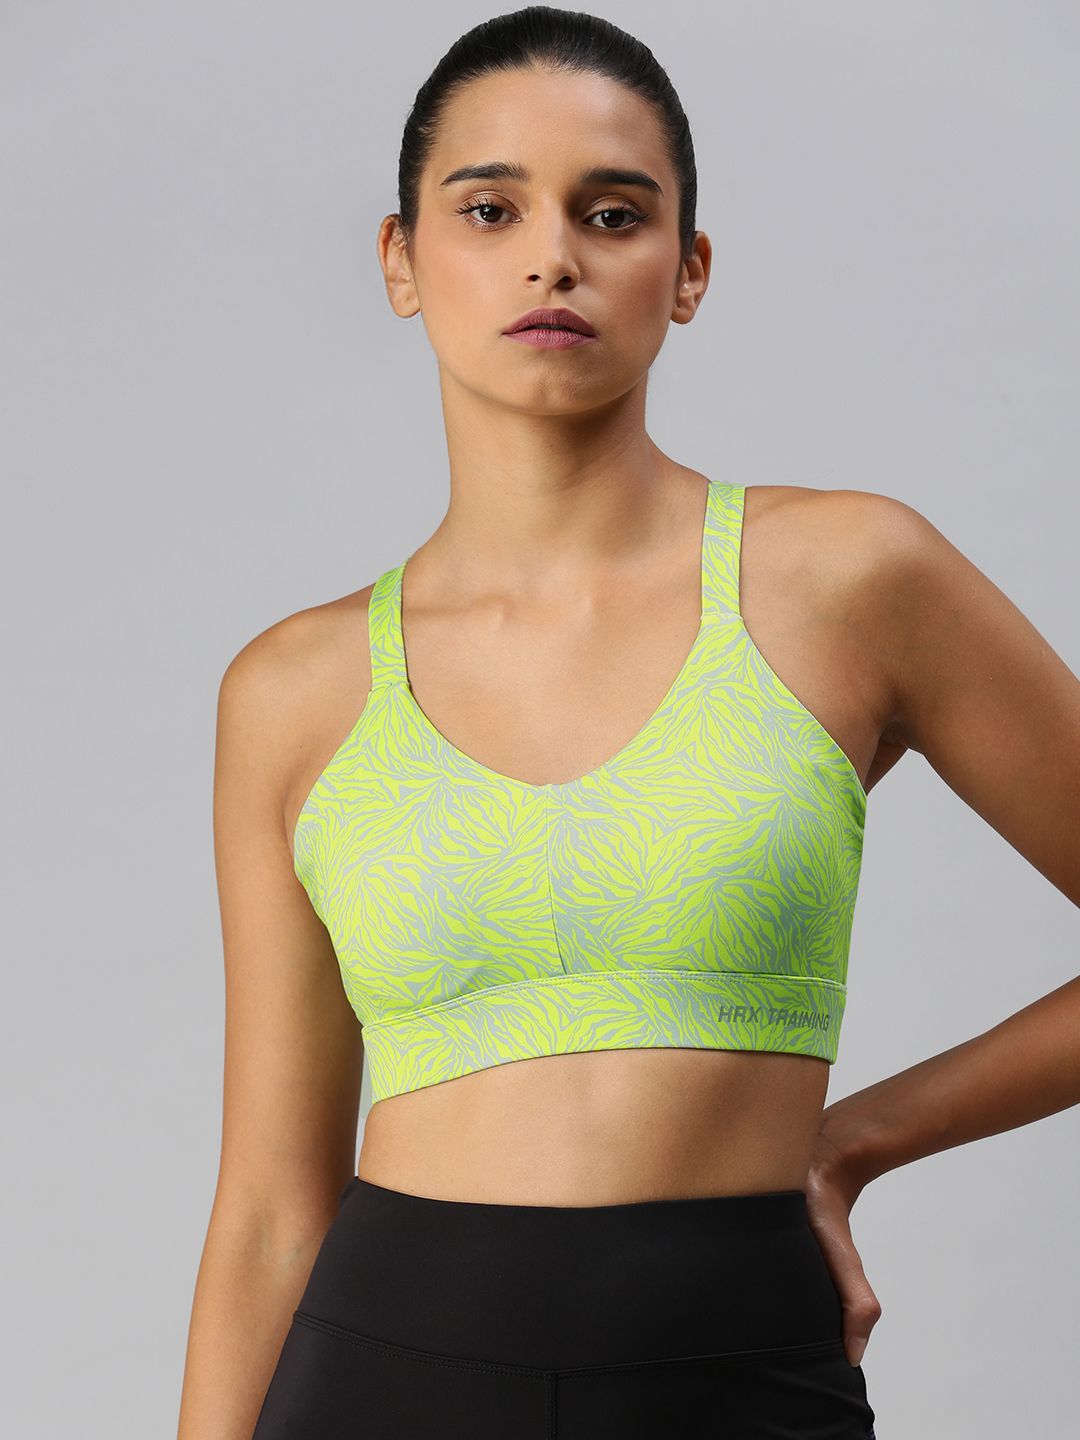 HRX - Unleash your inner athlete and gear up with the HRX Women's Sports Bra  collection 👊 Now available at incredible discounts during the Myntra End  Of Reason Sale. Start shopping now